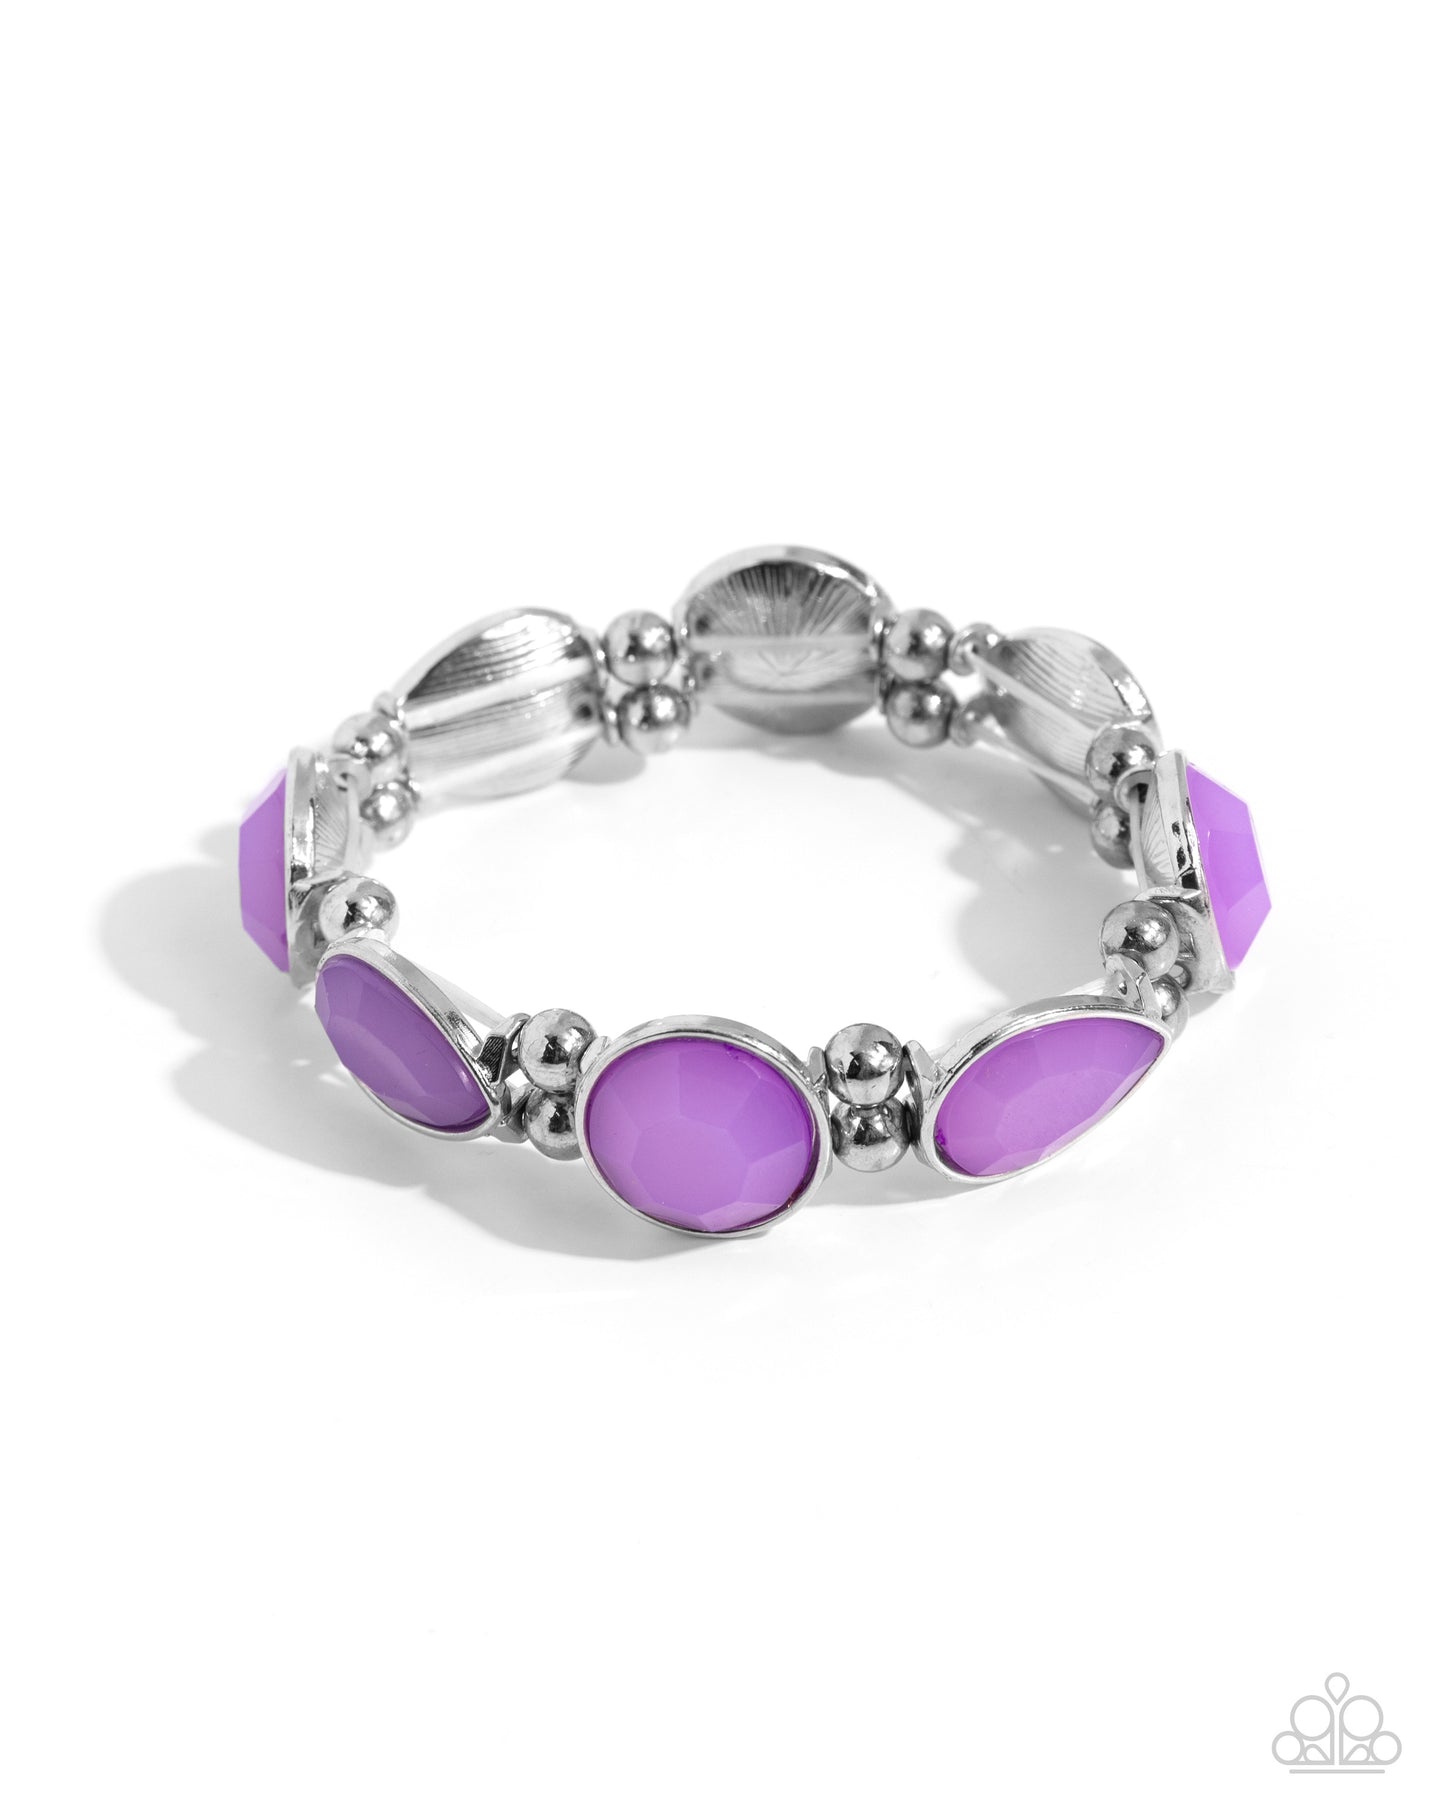 In All the BRIGHT Places - Purple Bracelet